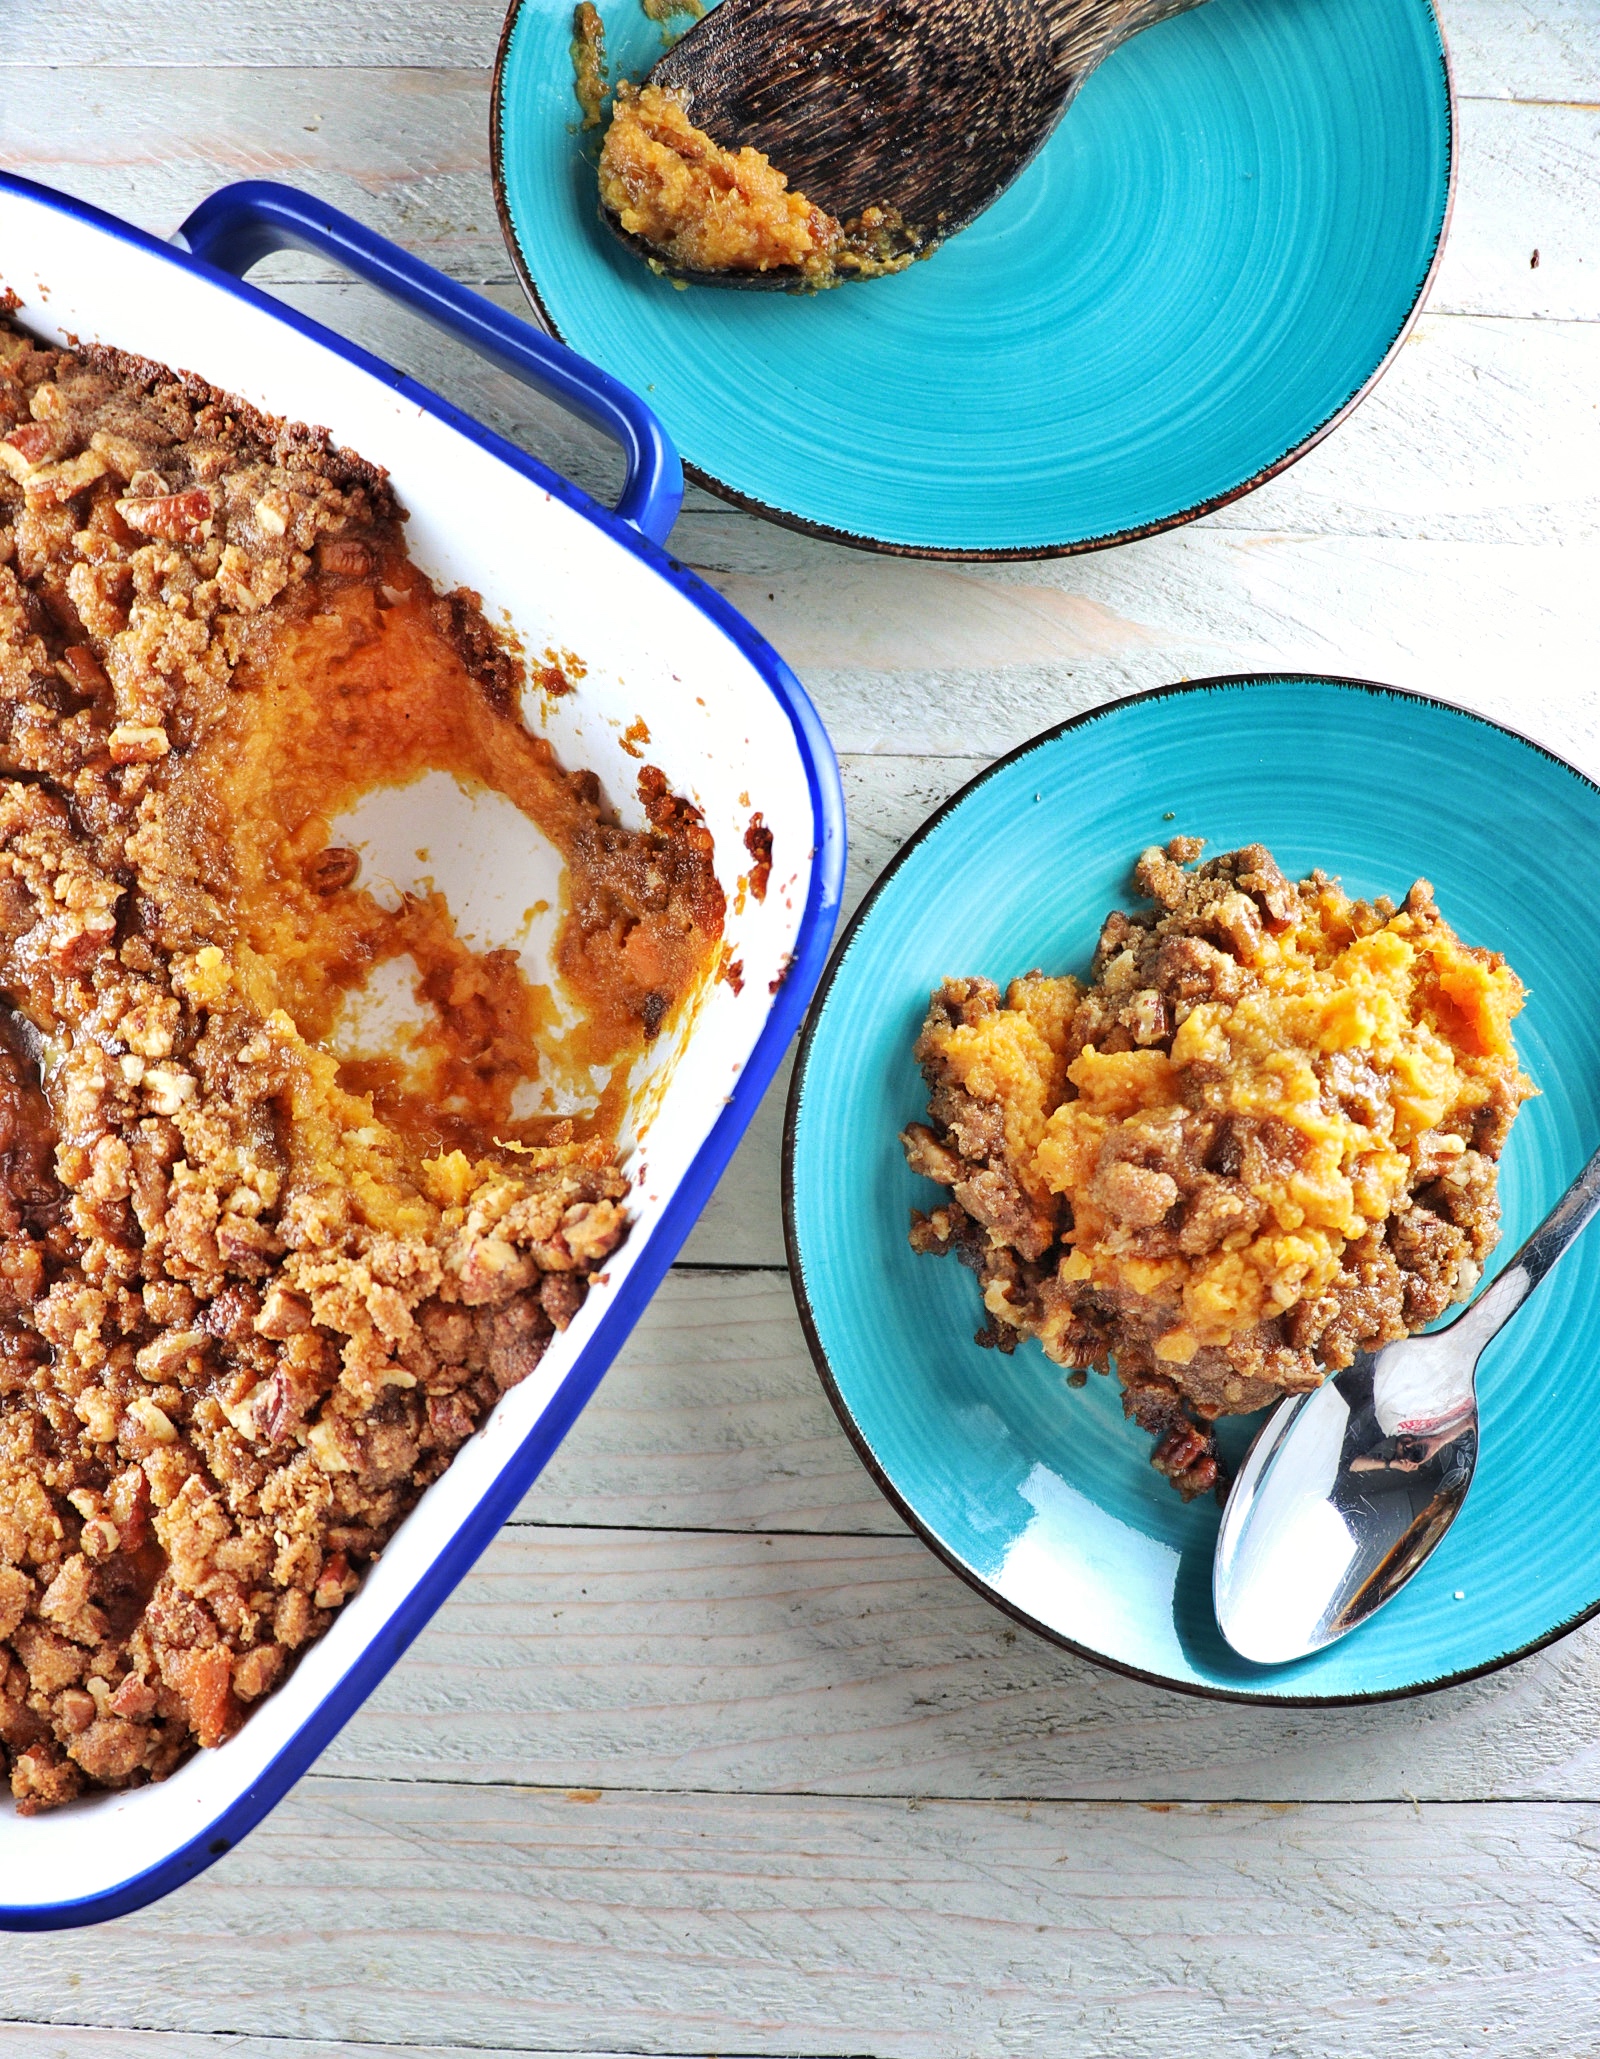 Candied Sweet Potato Casserole with Canned Yams & Pecan Topping